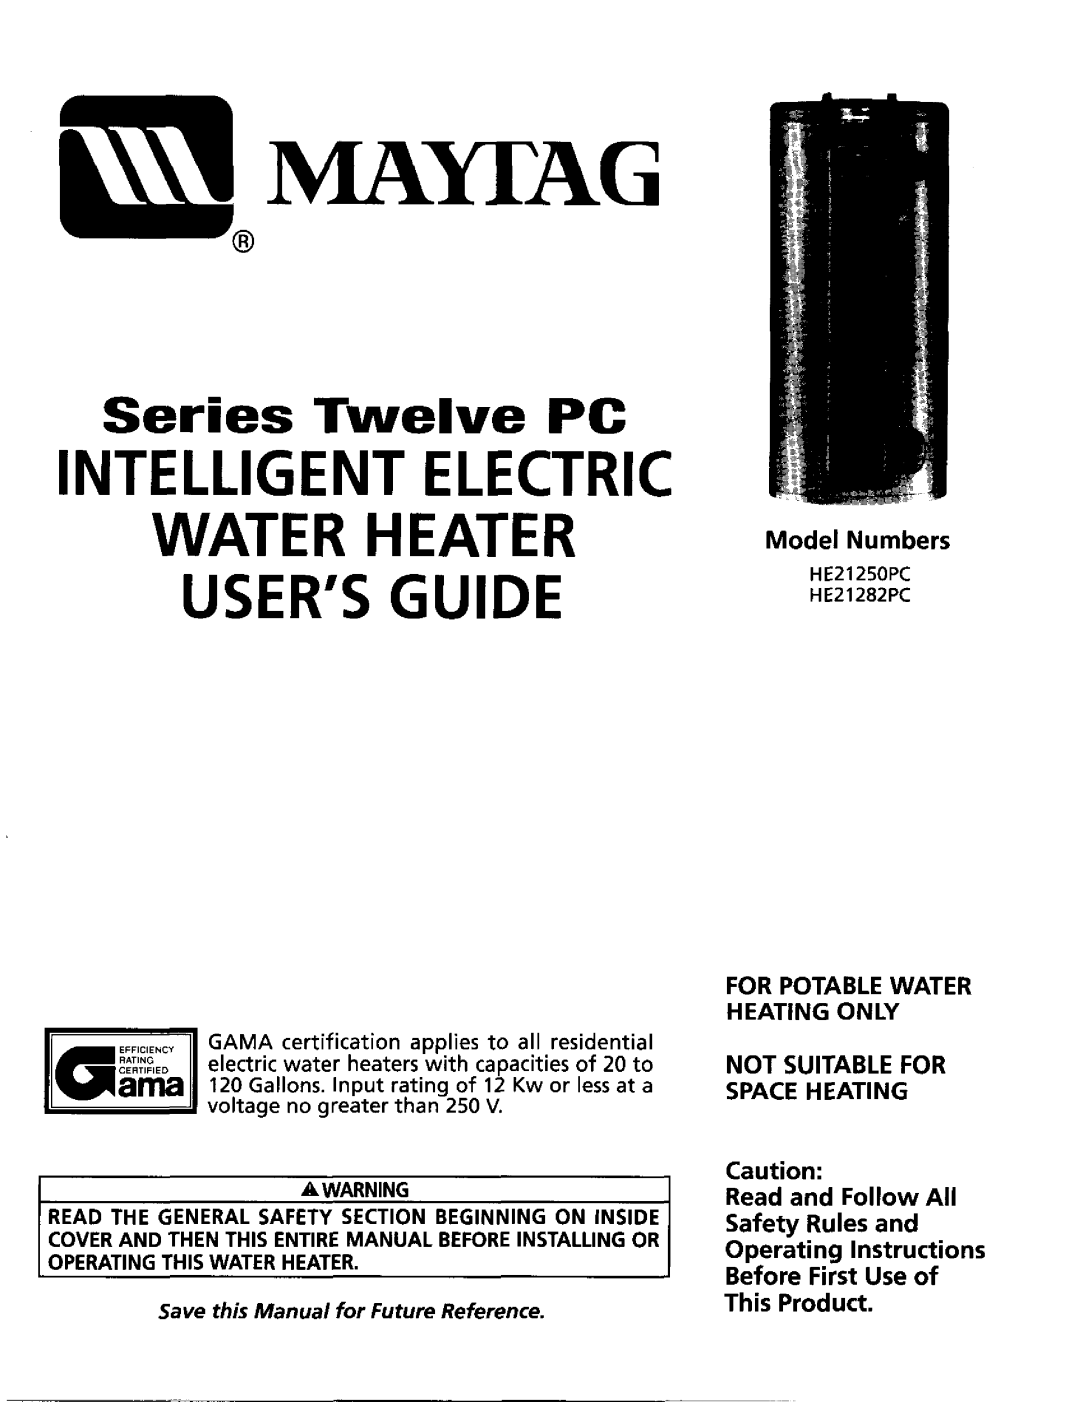 Maytag HE21282PC operating instructions Iviayiag, INTELLIGENTELECTRIC WATER HEATER o , Numbers, Usersguide, Safety 